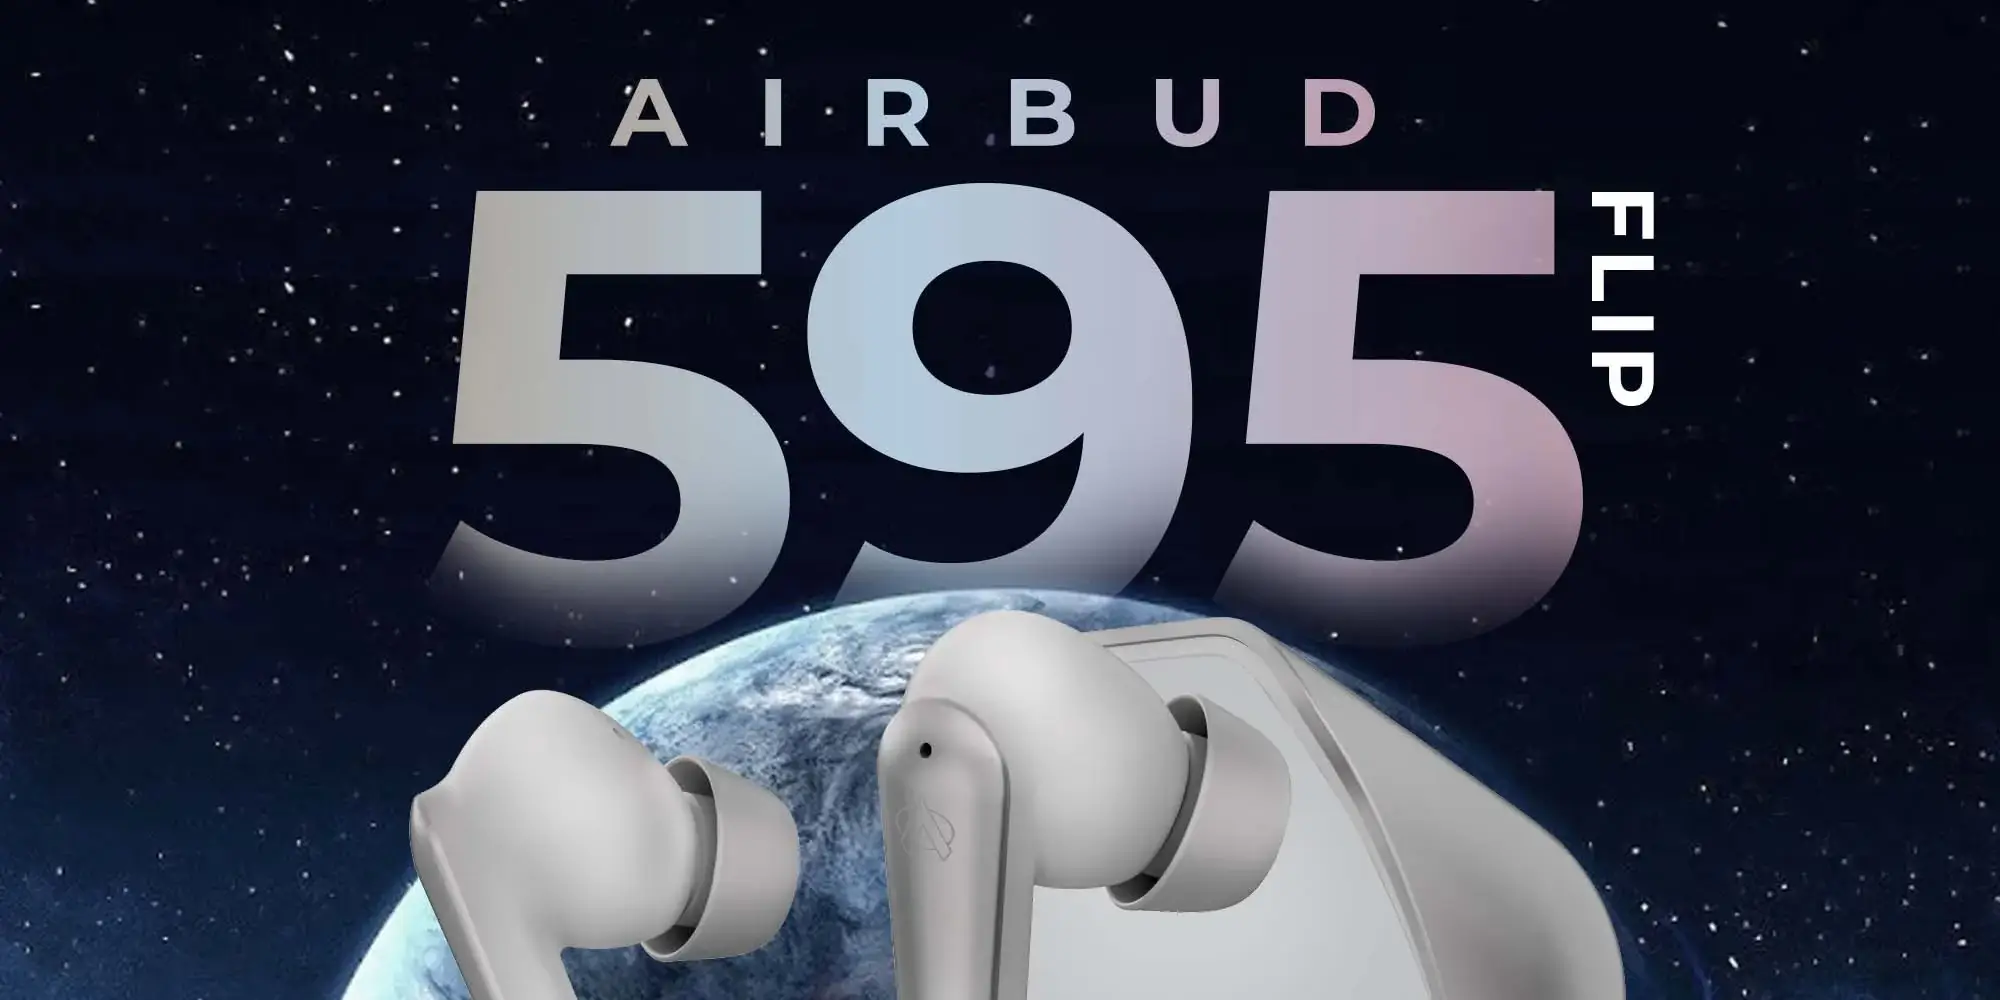 Airbud-595-Product_Page-1